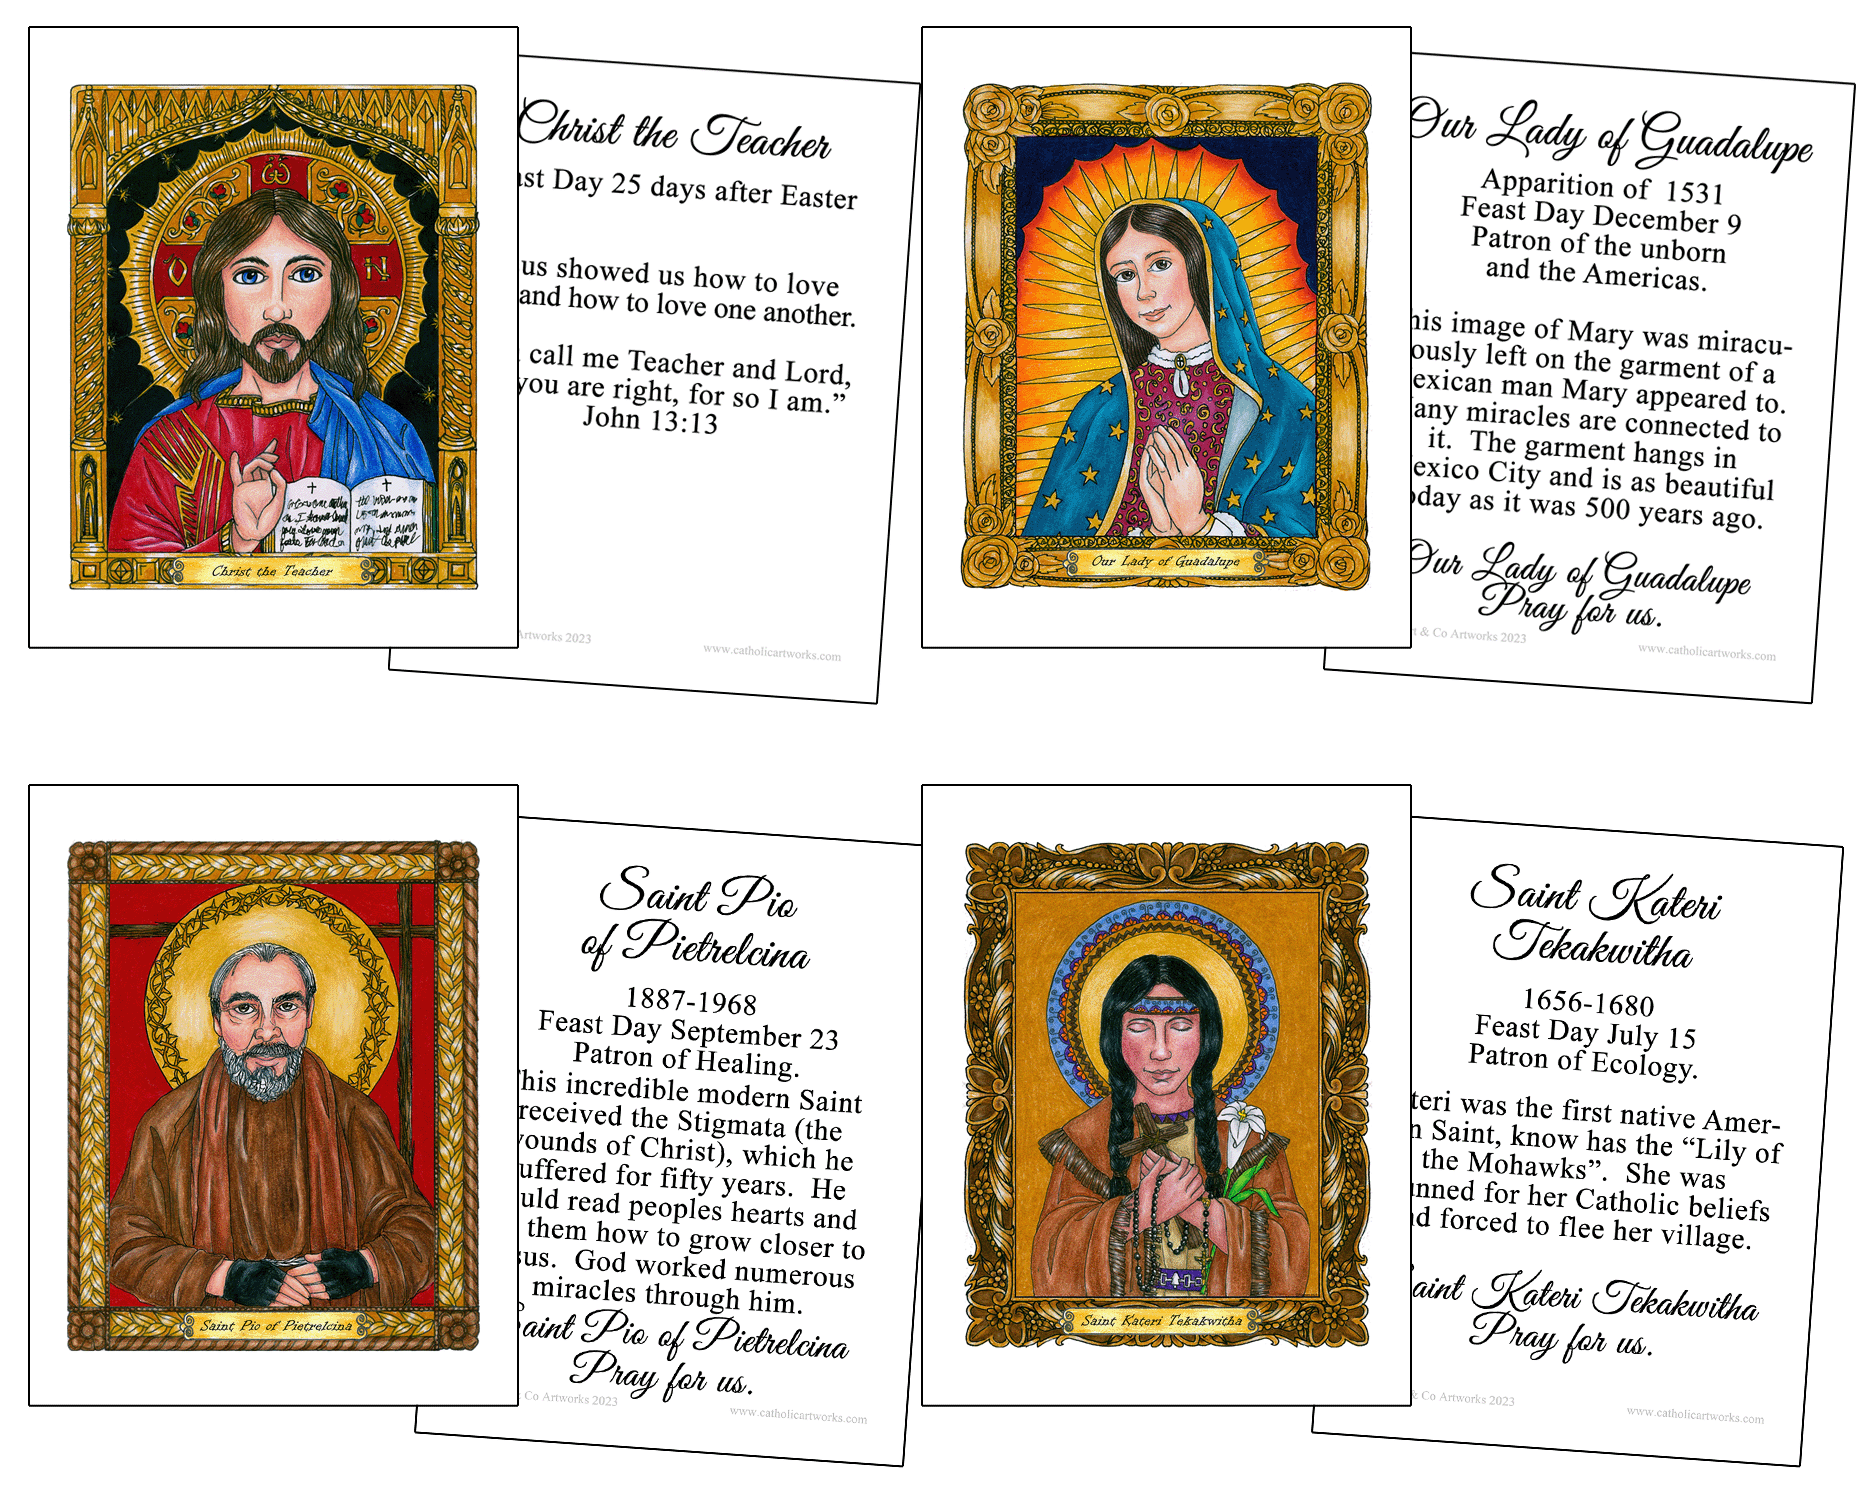 Divine Mercy Holy Cards